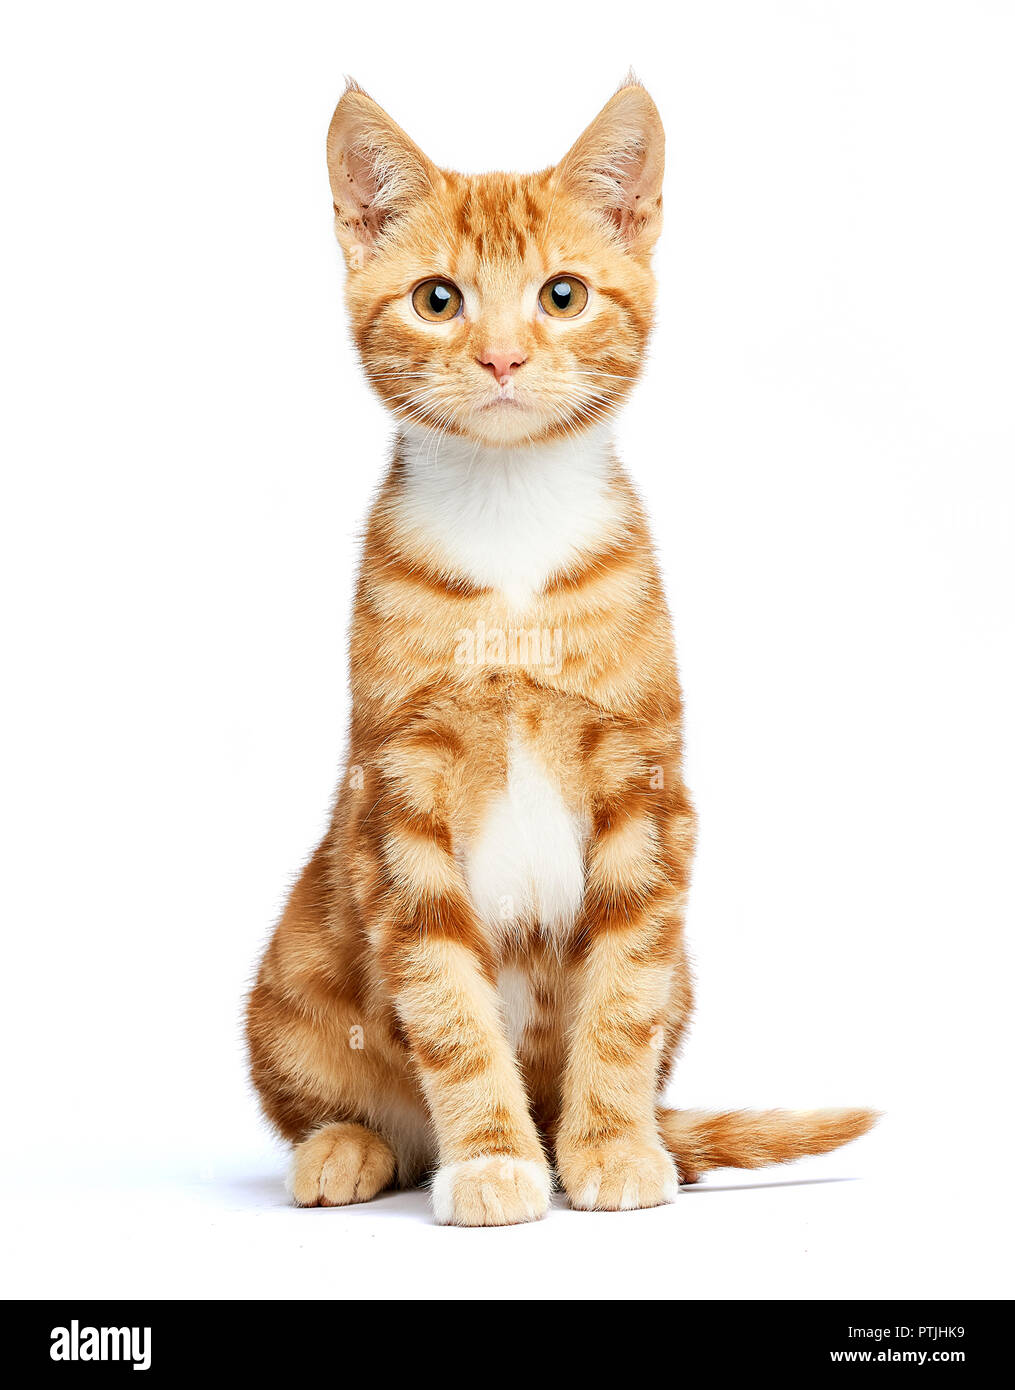 Adorable ginger red tabby kitten sitting, curious and isolated on white background. Stock Photo